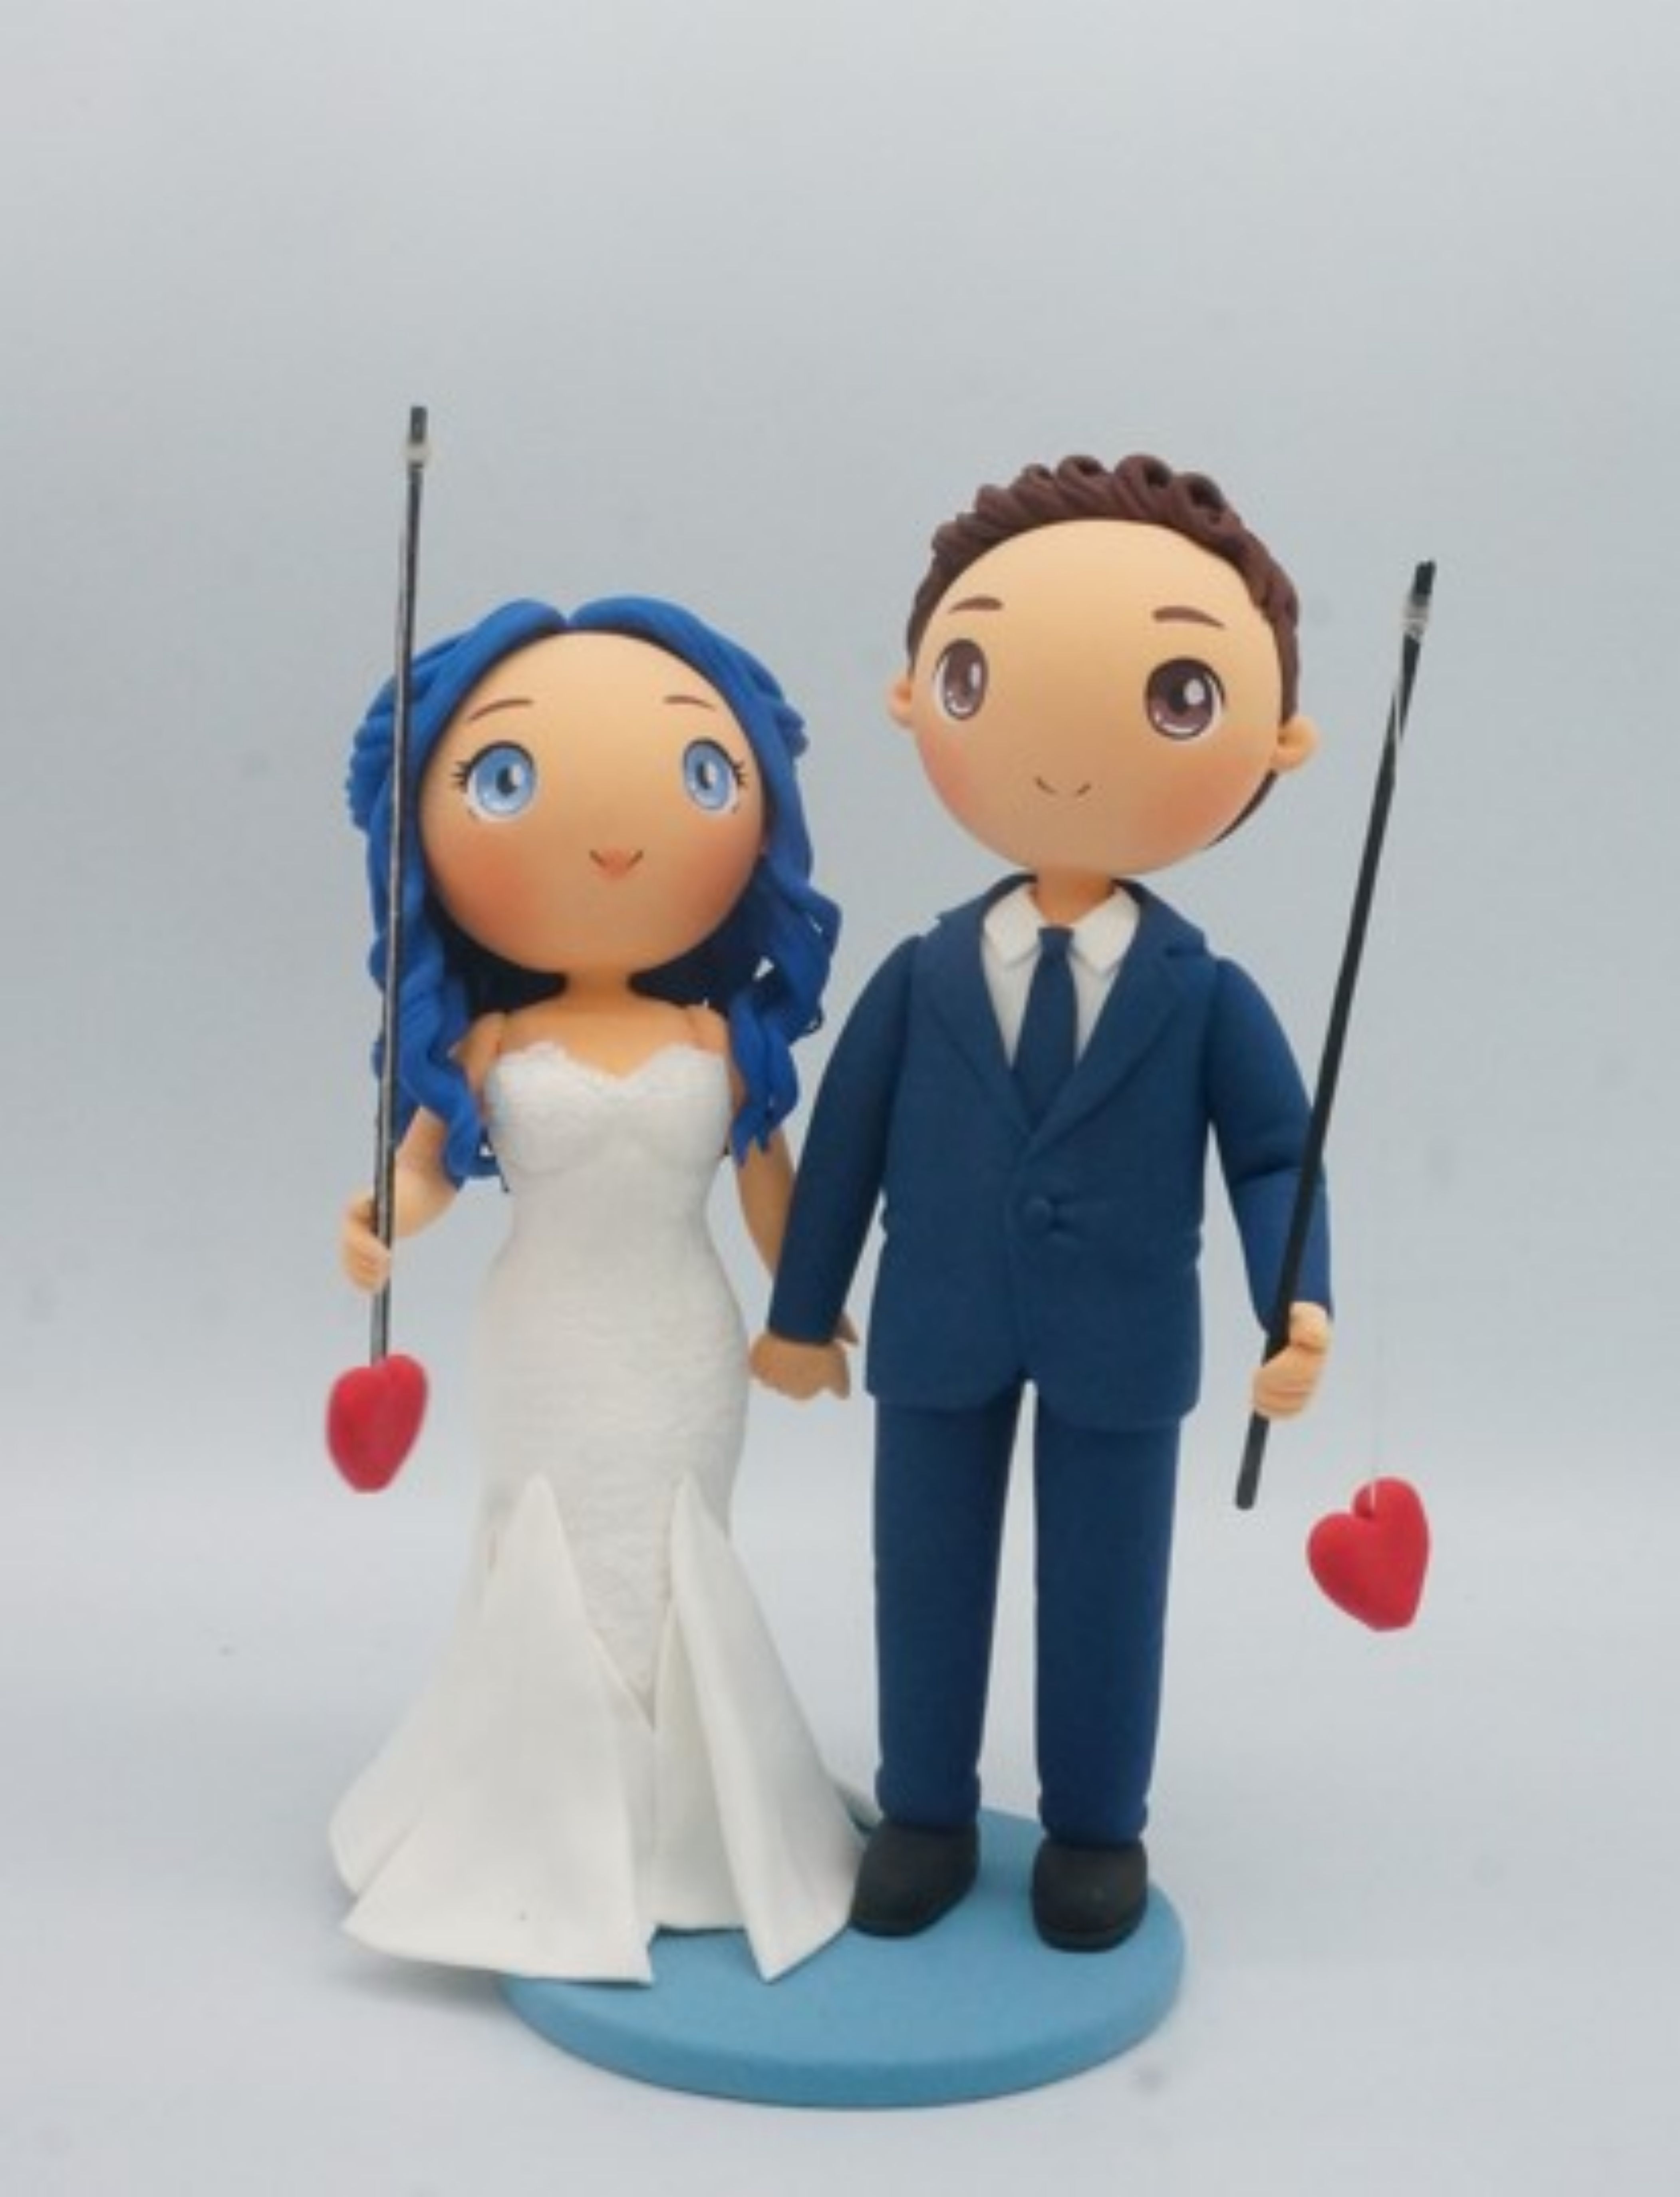 https://www.worldcaketopper.com/images/thumbs/0011024_fishing-bride-and-groom-wedding-cake-topper-steal-your-heart-wedding-cake-topper_5500.jpeg